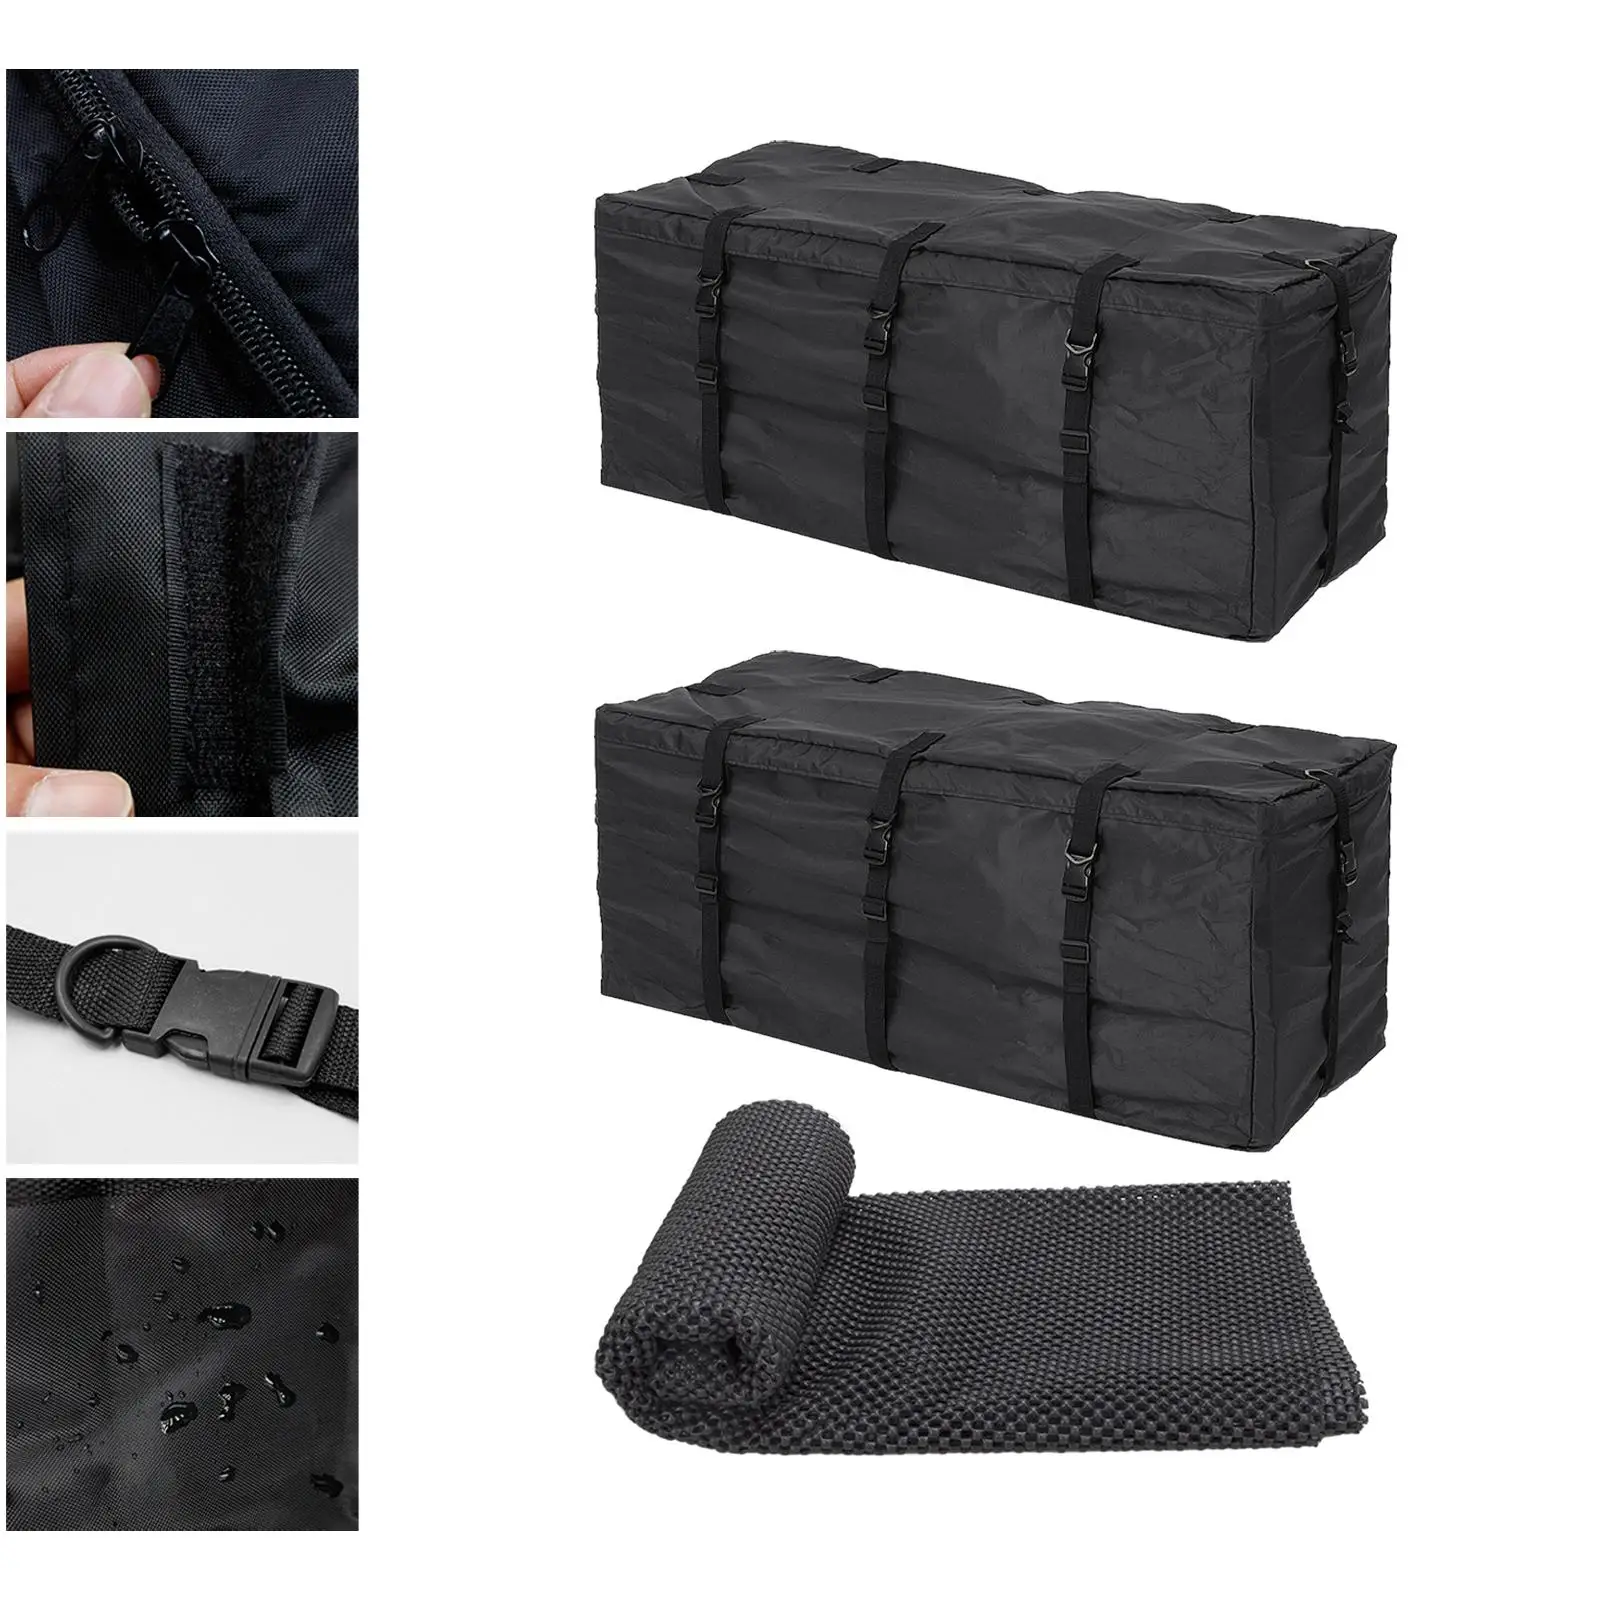 Car Rooftop Bag Reinforced Straps Car Roof Luggage Bag for SUV Vehicles